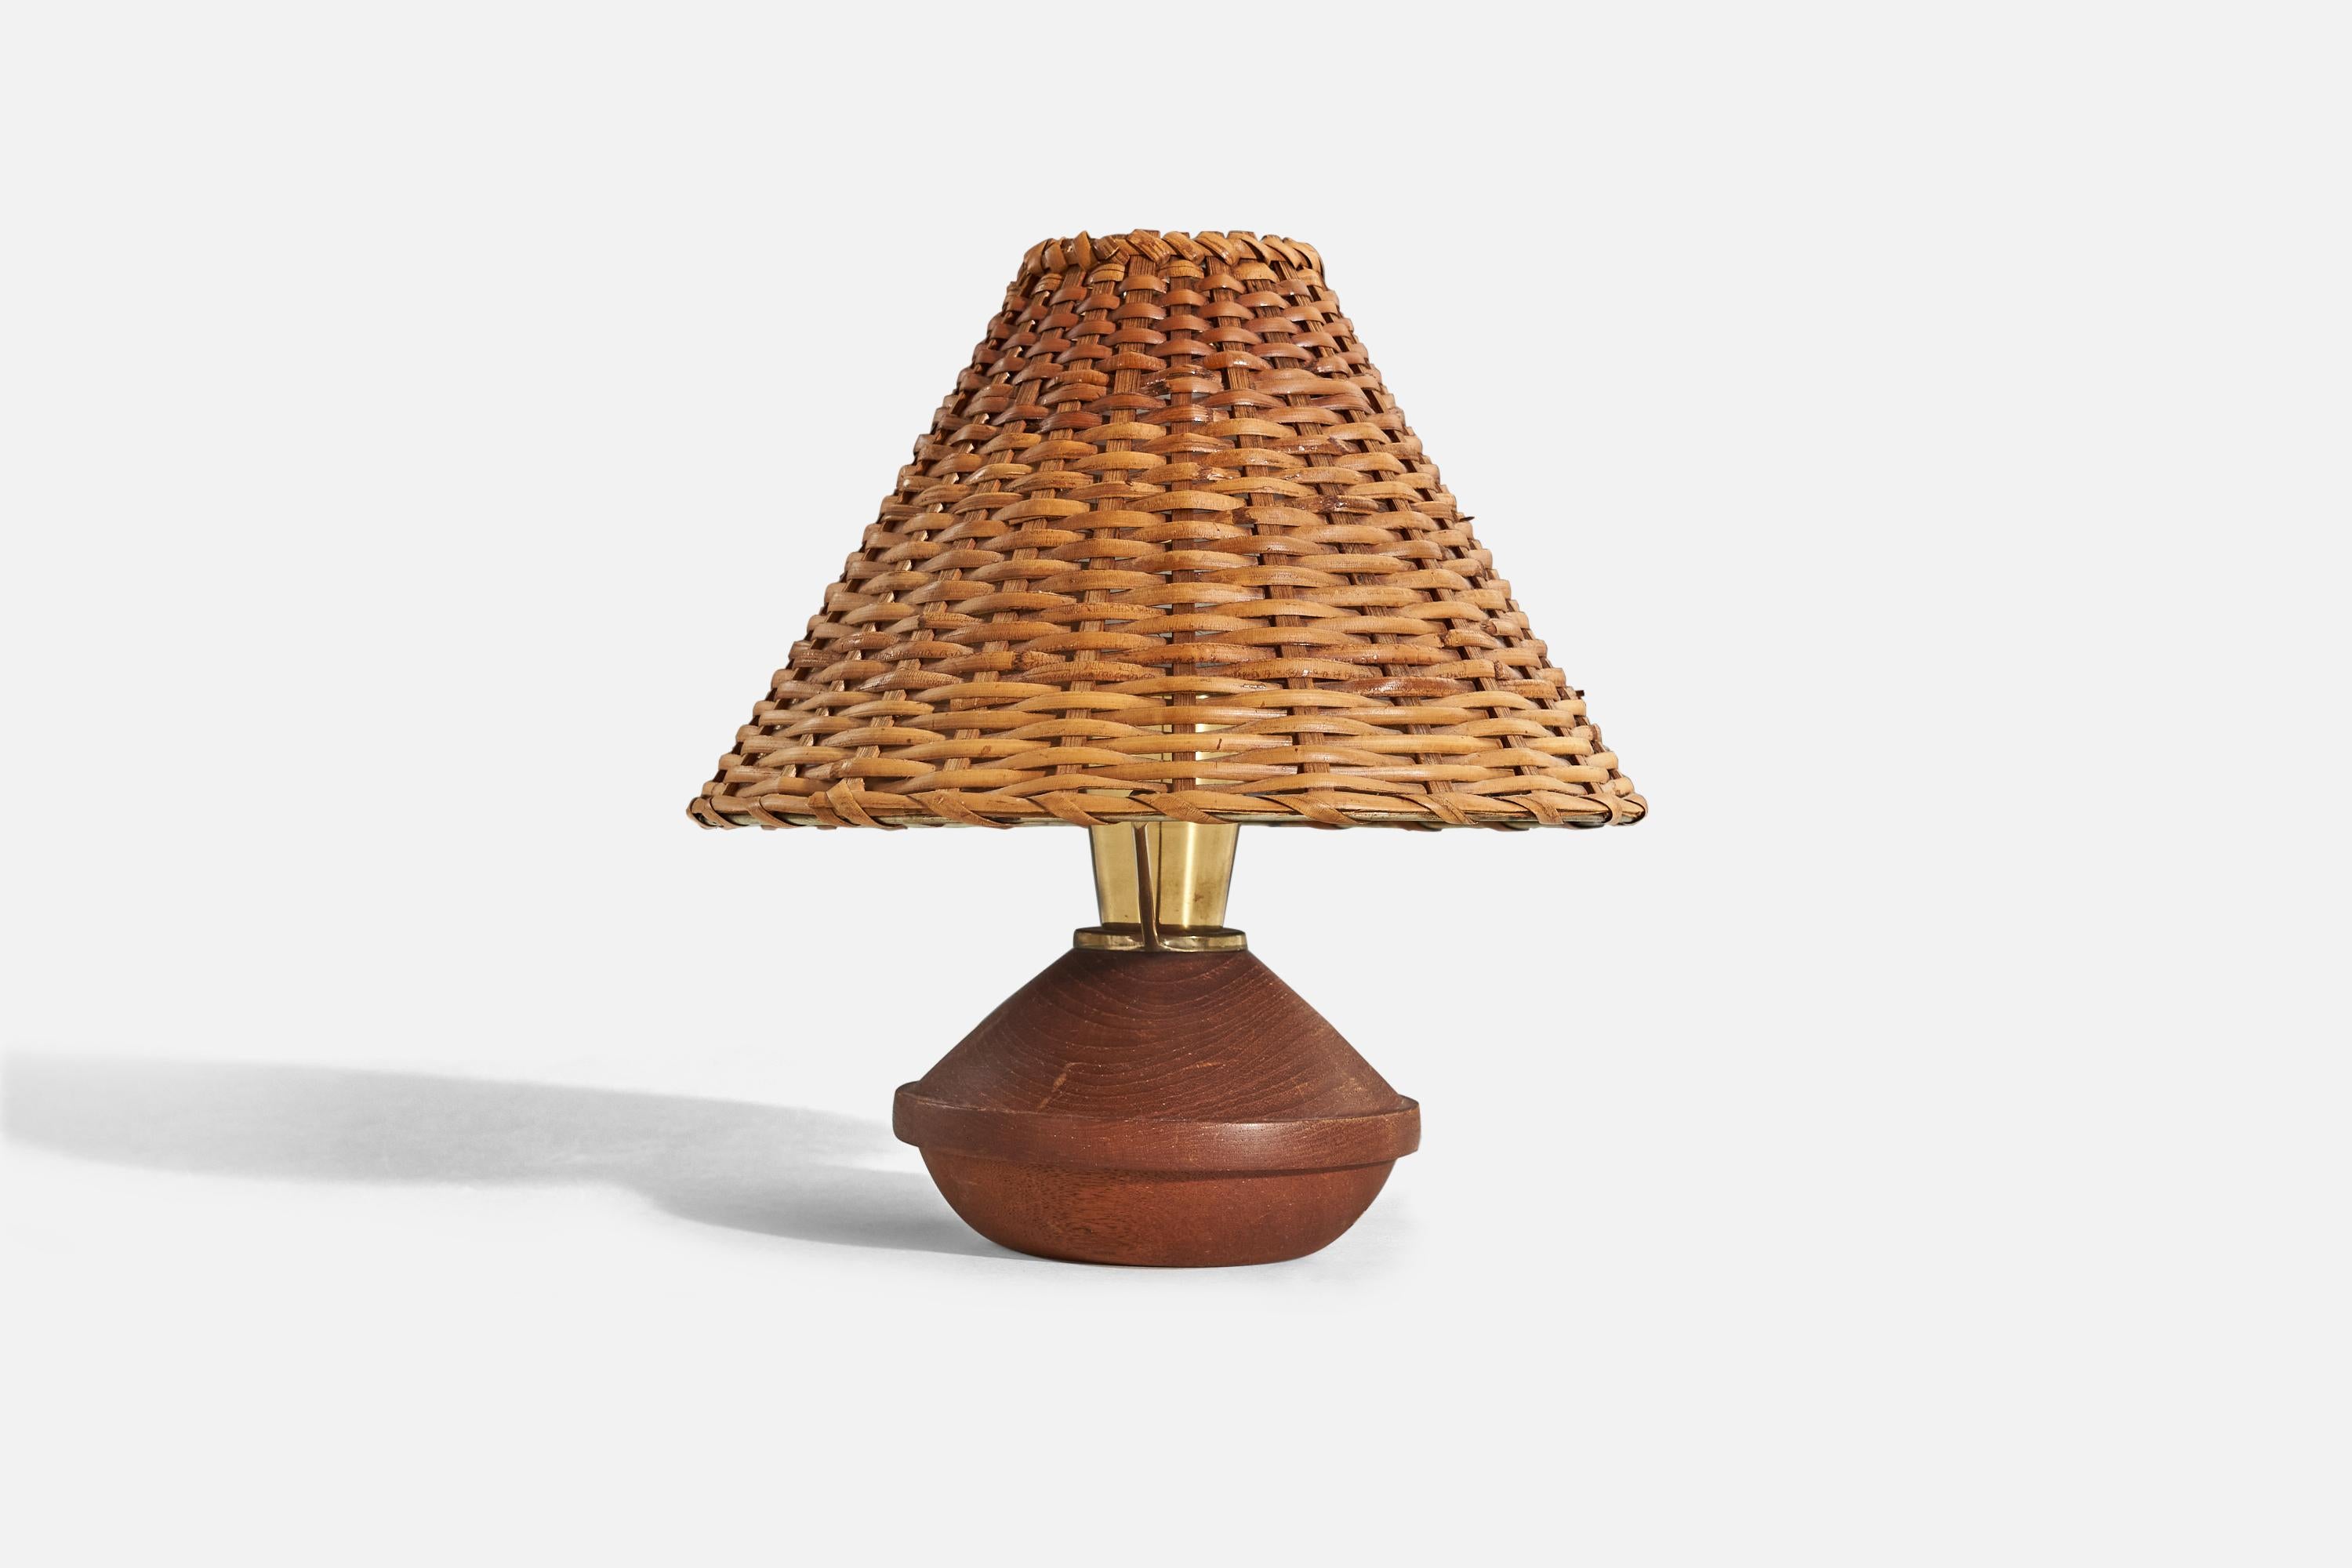 A teak, brass and rattan table lamp designed by Bertel Gardberg and produced by Lival Oy, Finland, 1960s. 

Sold with lampshade. 
Dimensions of Lamp (inches) : 5.93 x 9.62 x 5.68 (H x W x D)
Dimensions of Shade (inches) : 3 x 10.18 x 7 (T x B x